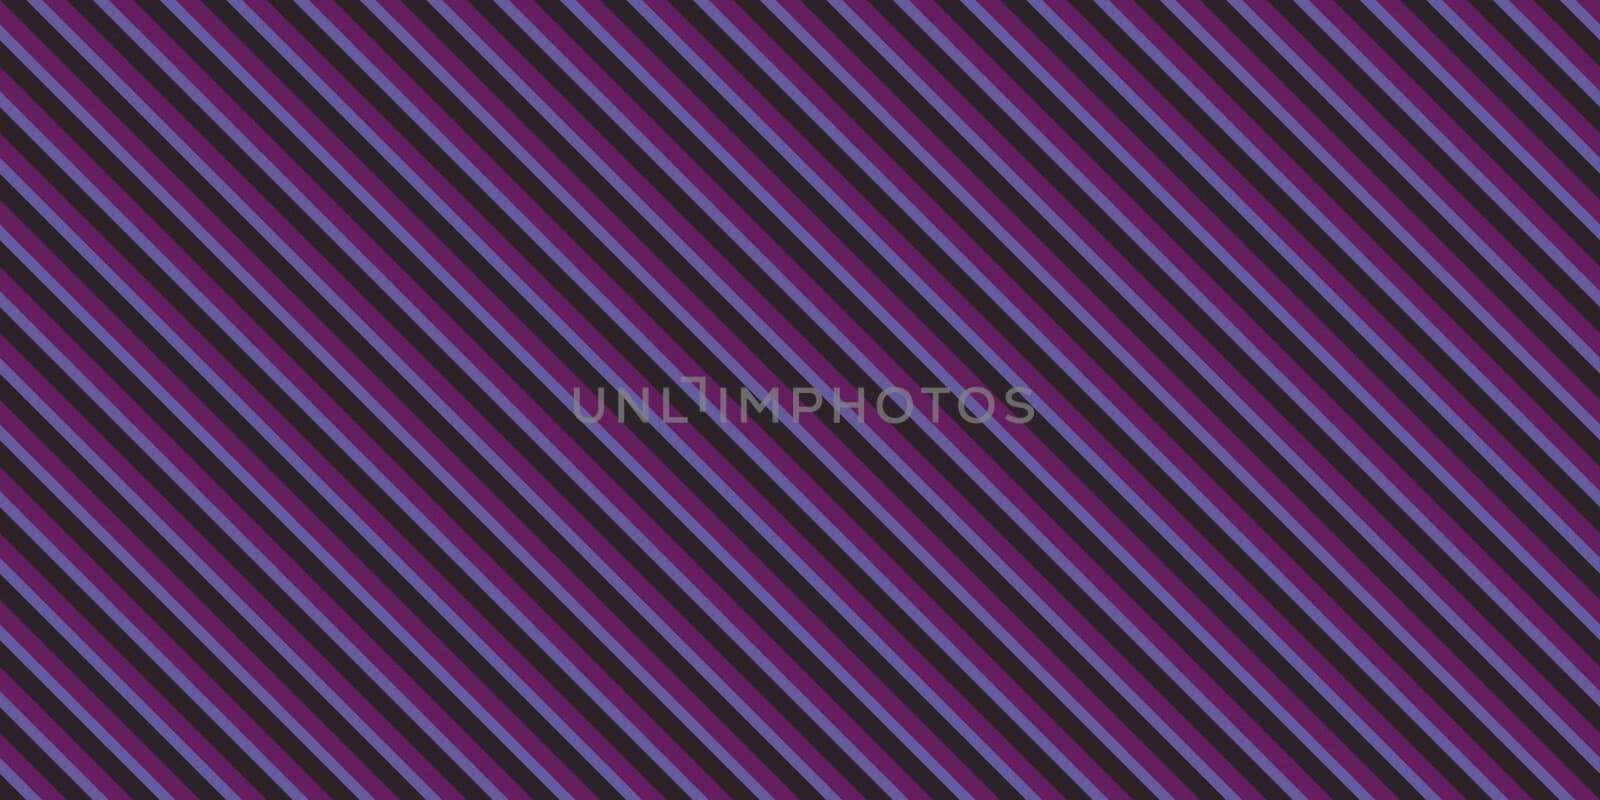 Lilac Purple Dark Gray Seamless Striped Lines Background Texture. Modern Vintage Style Pattern. by sanches812